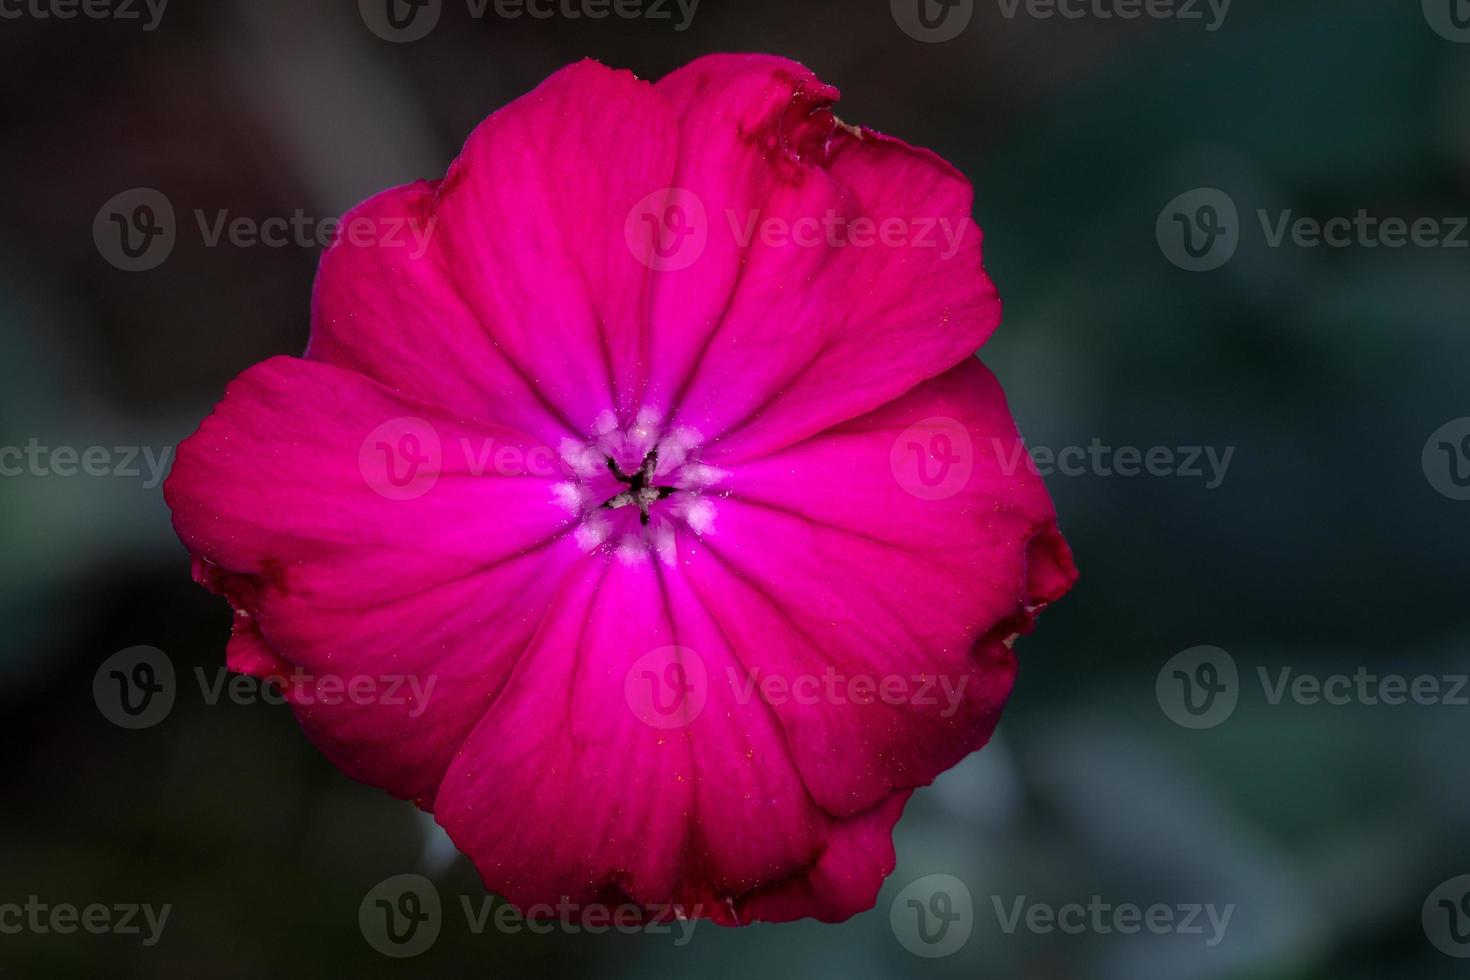 A single wilting red flower photo